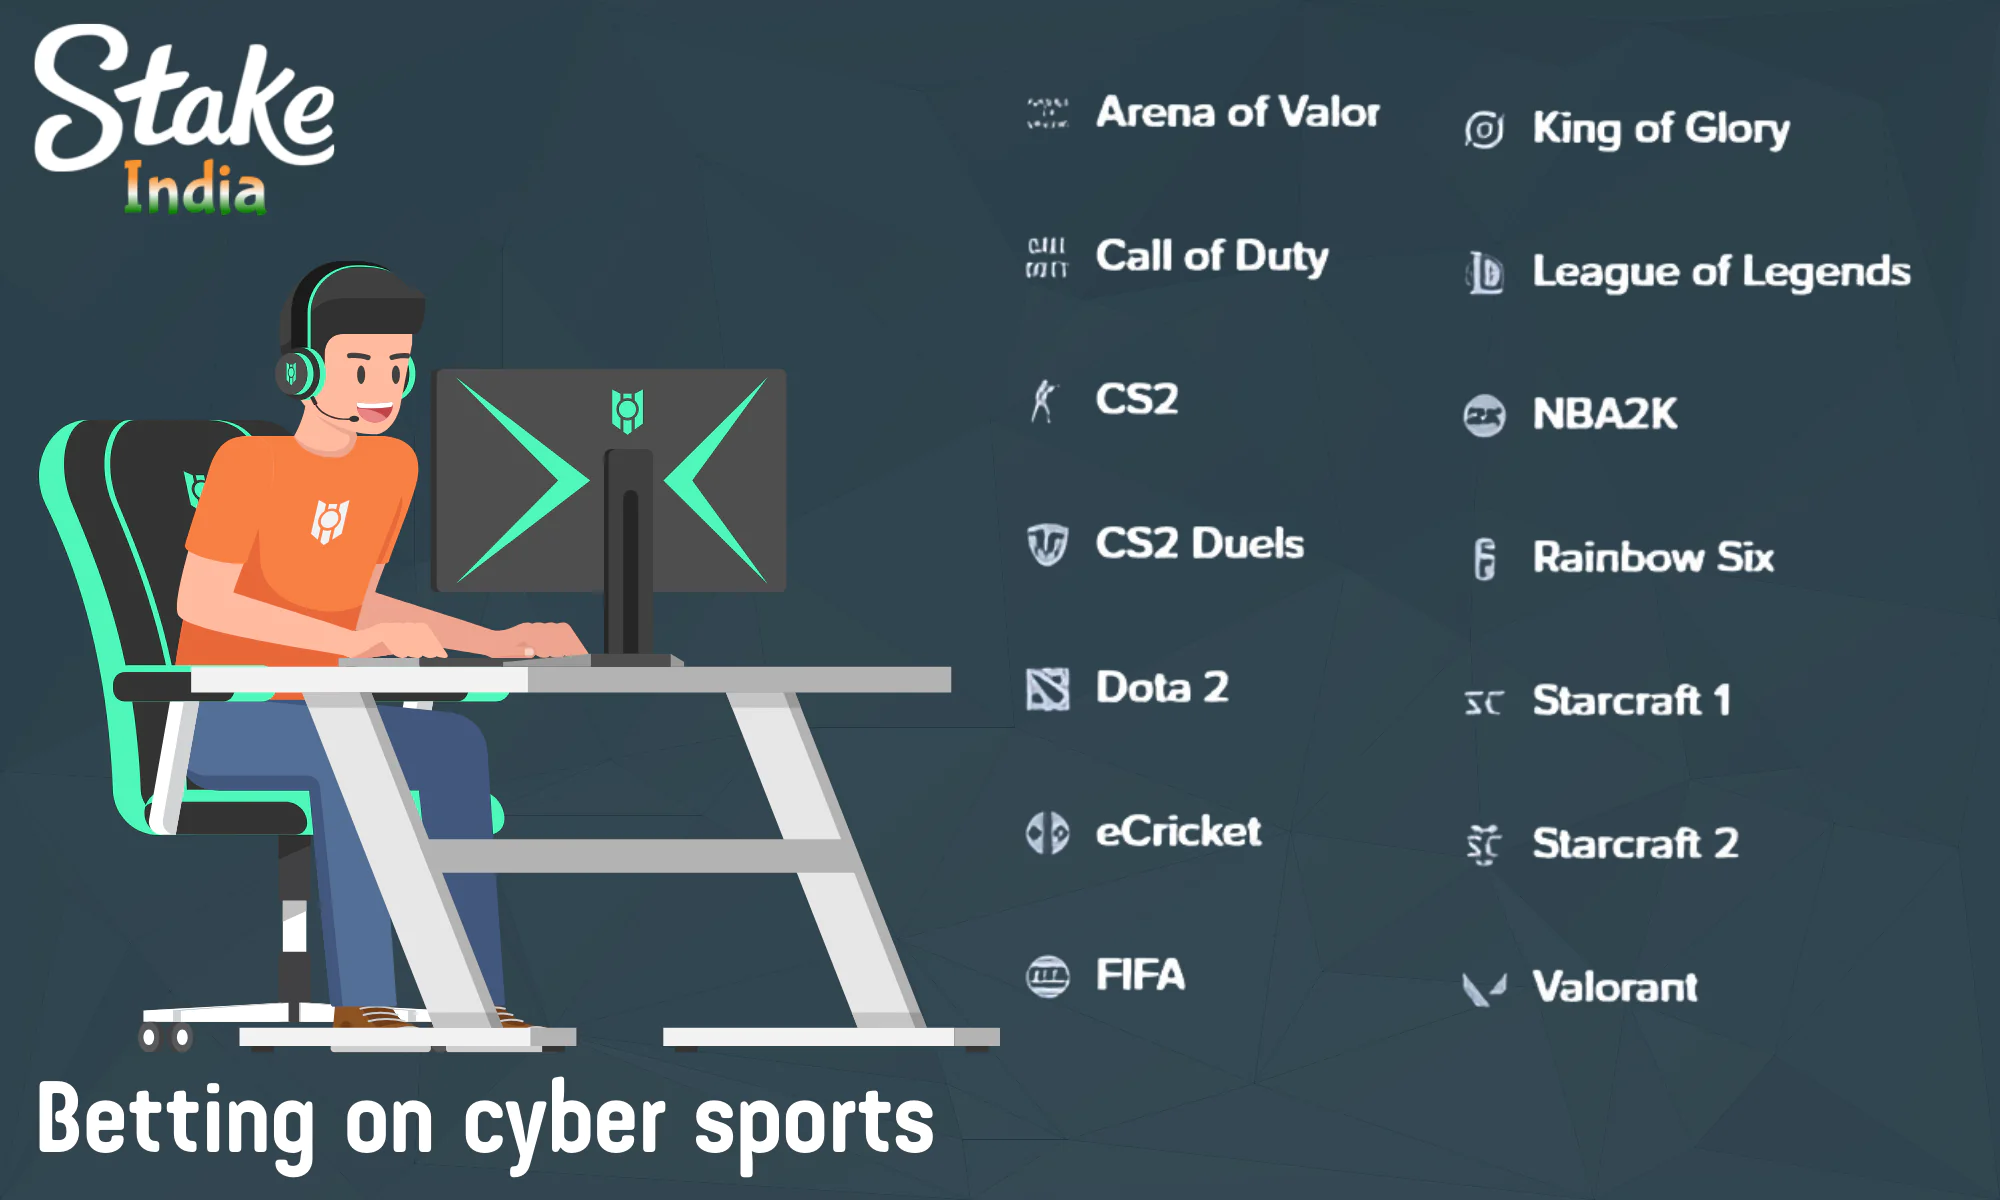 For fans of eSports events, Stake offers bets on the most popular eSports events